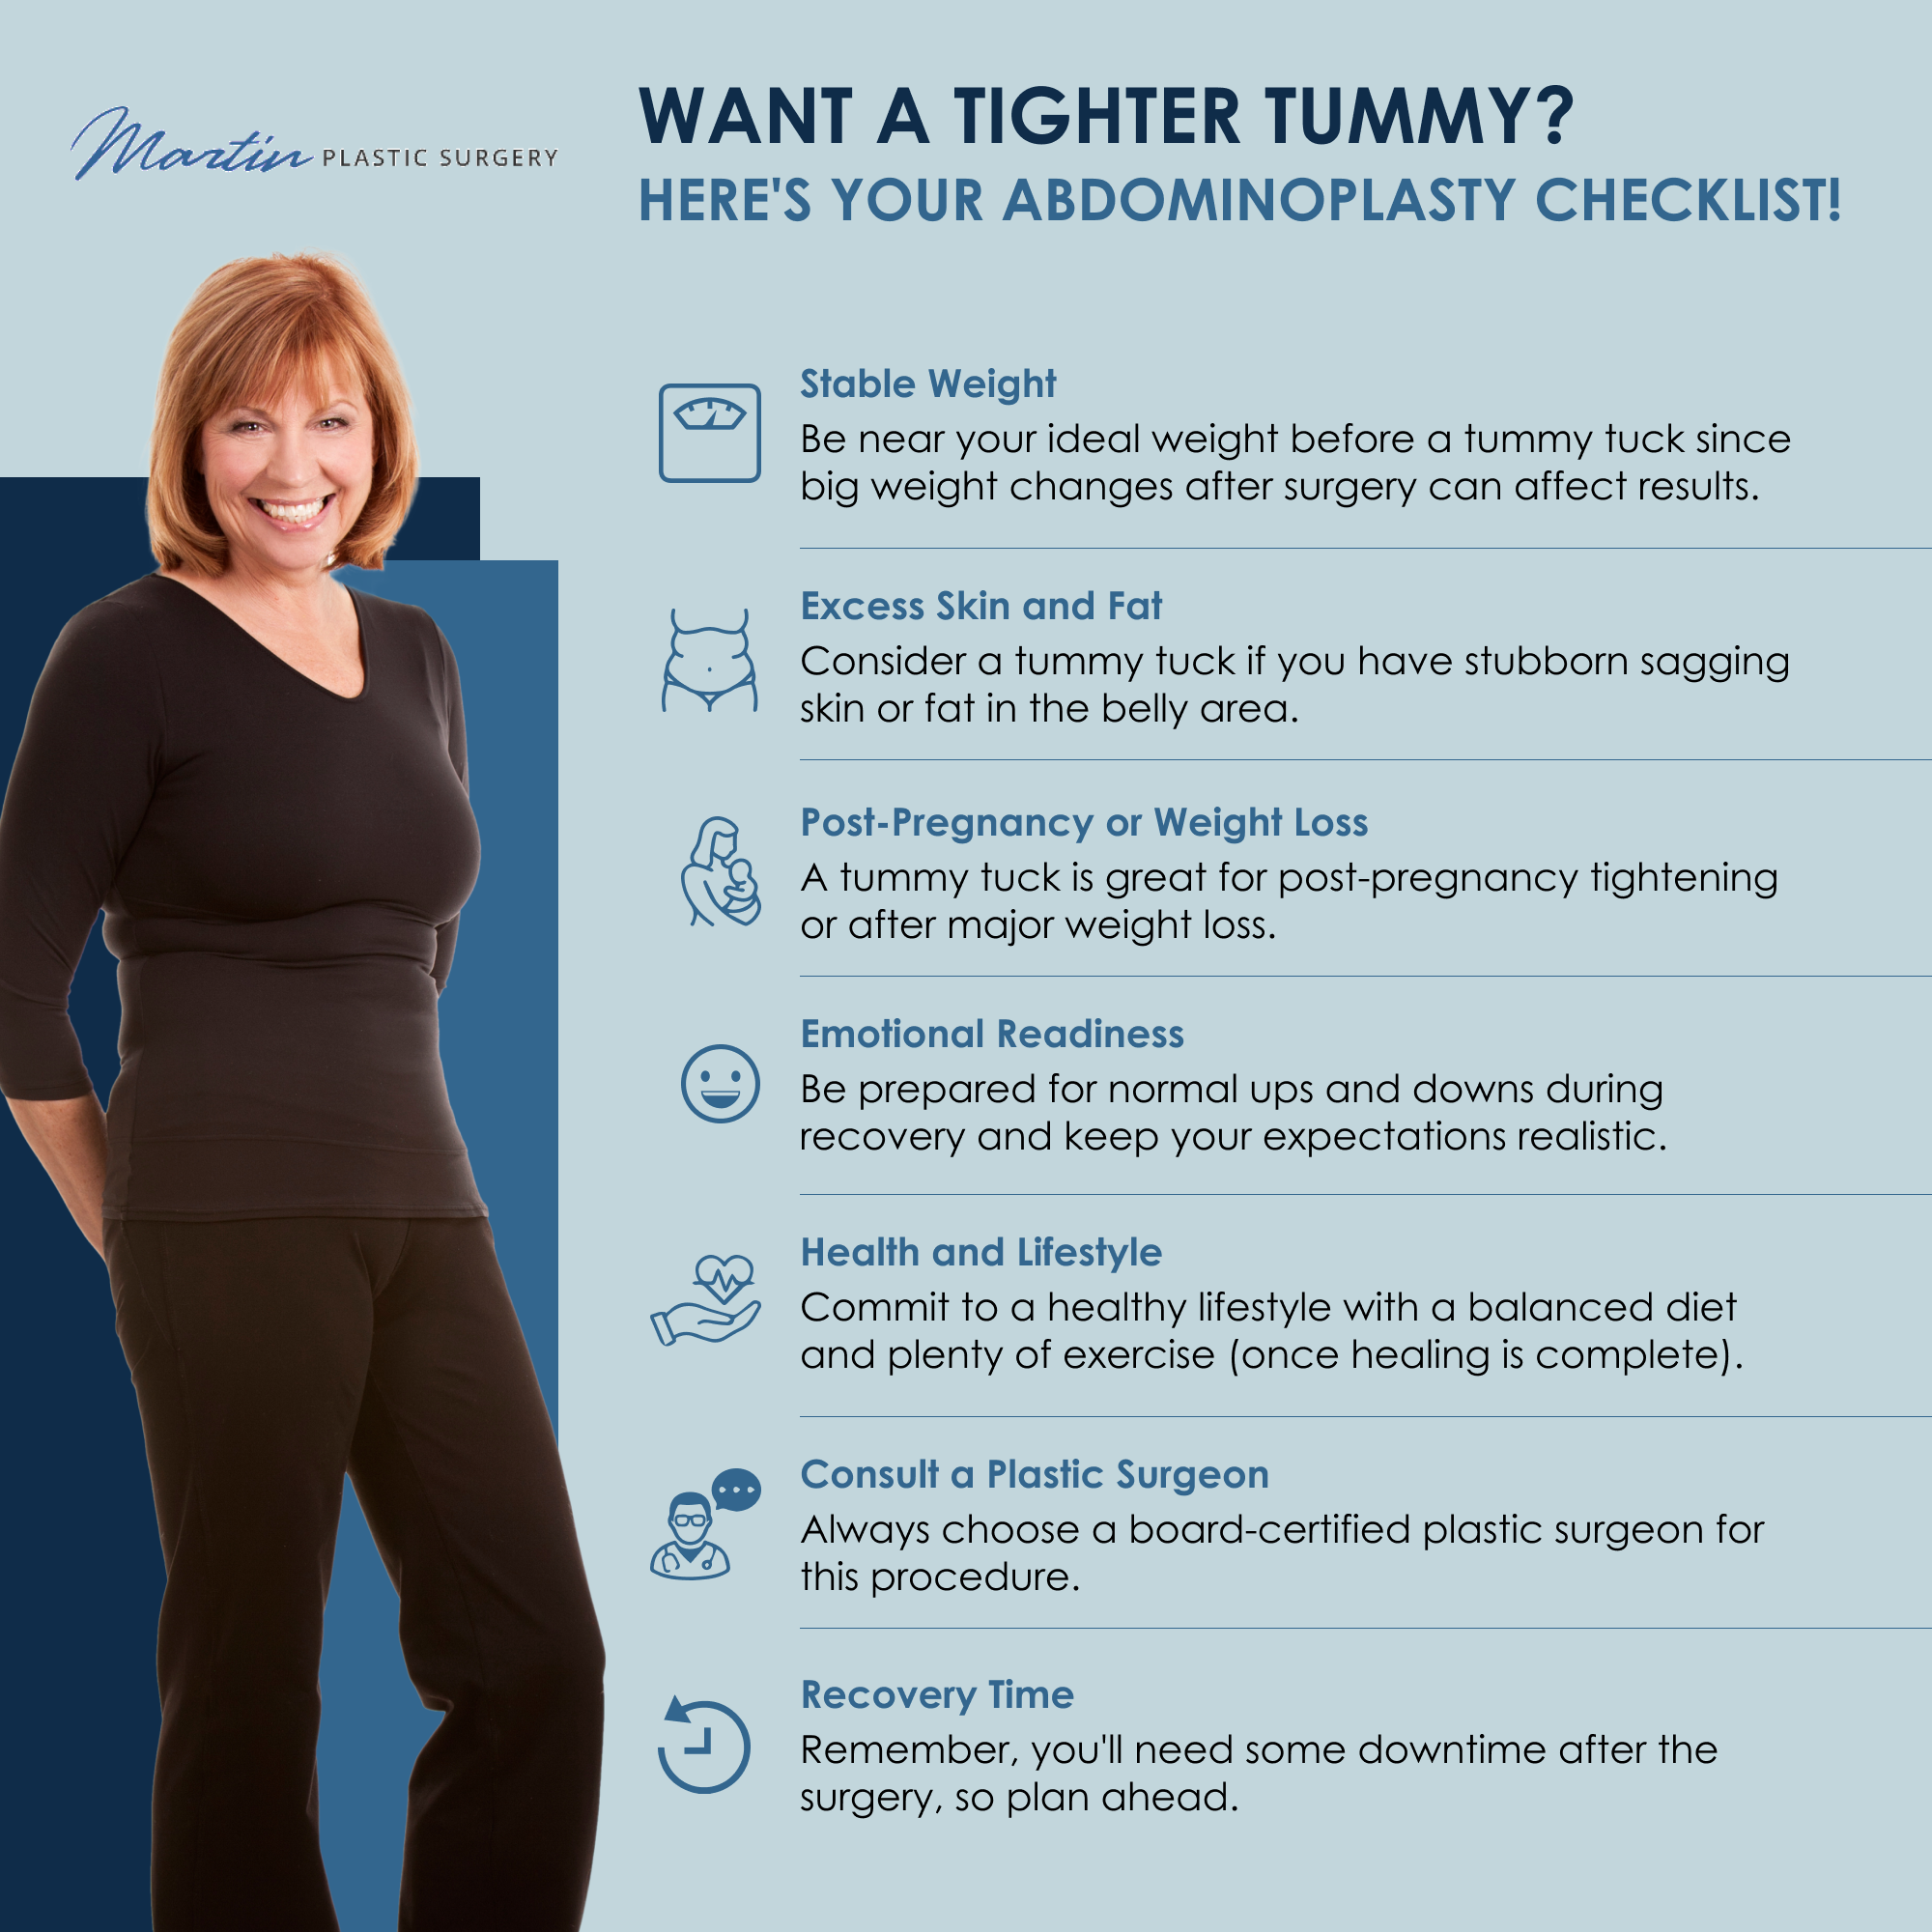 WANT A TIGHTER TUMMY? HERE'S YOUR ABDOMINOPLASTY CHECKLIST!